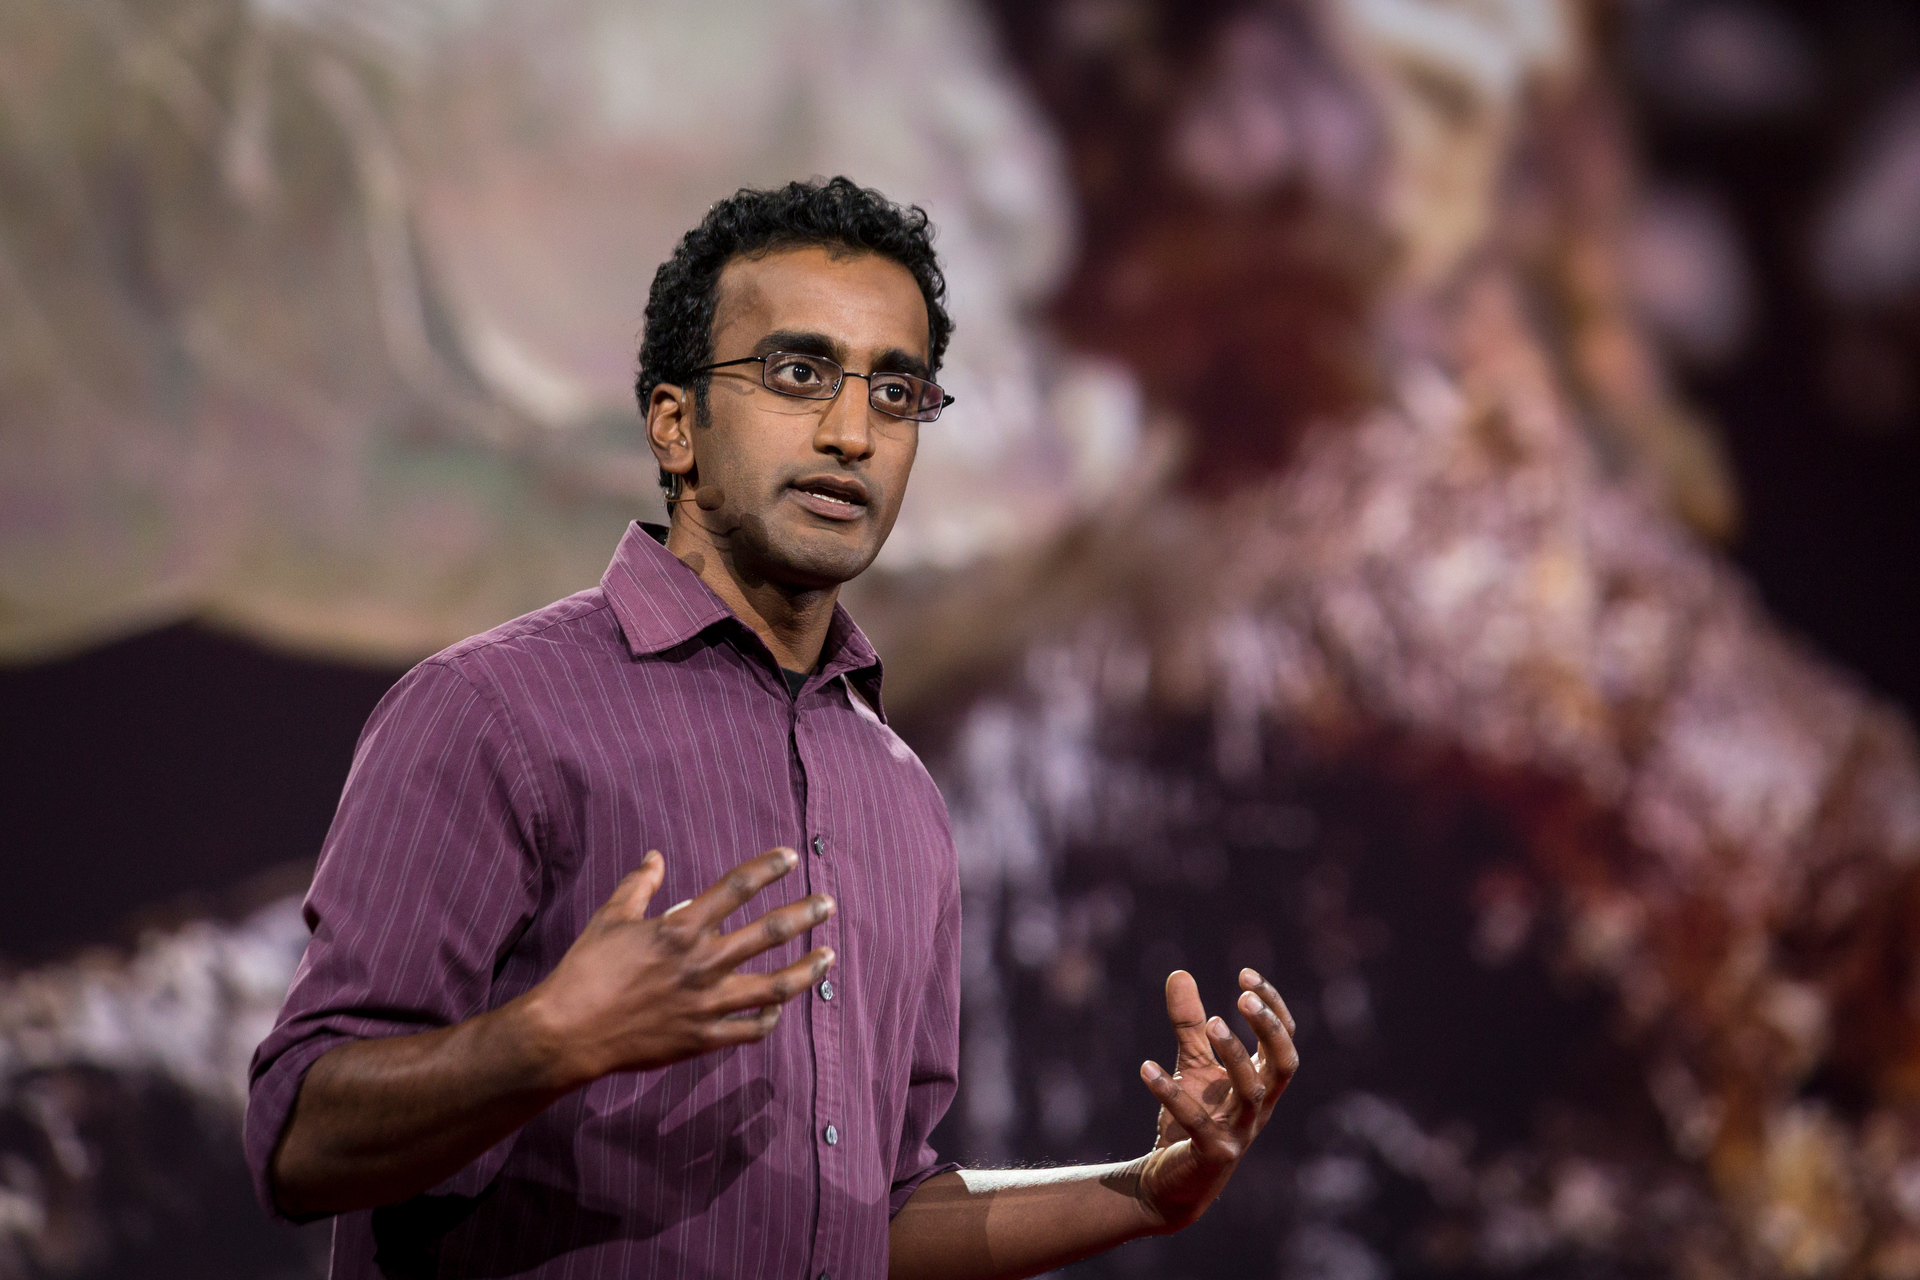 Anand Varma speaks at TED2015 - Truth and Dare, Session 8, March 16-20, 2015, Vancouver Convention Center, Vancouver, Canada. Photo: Bret Hartman/TED